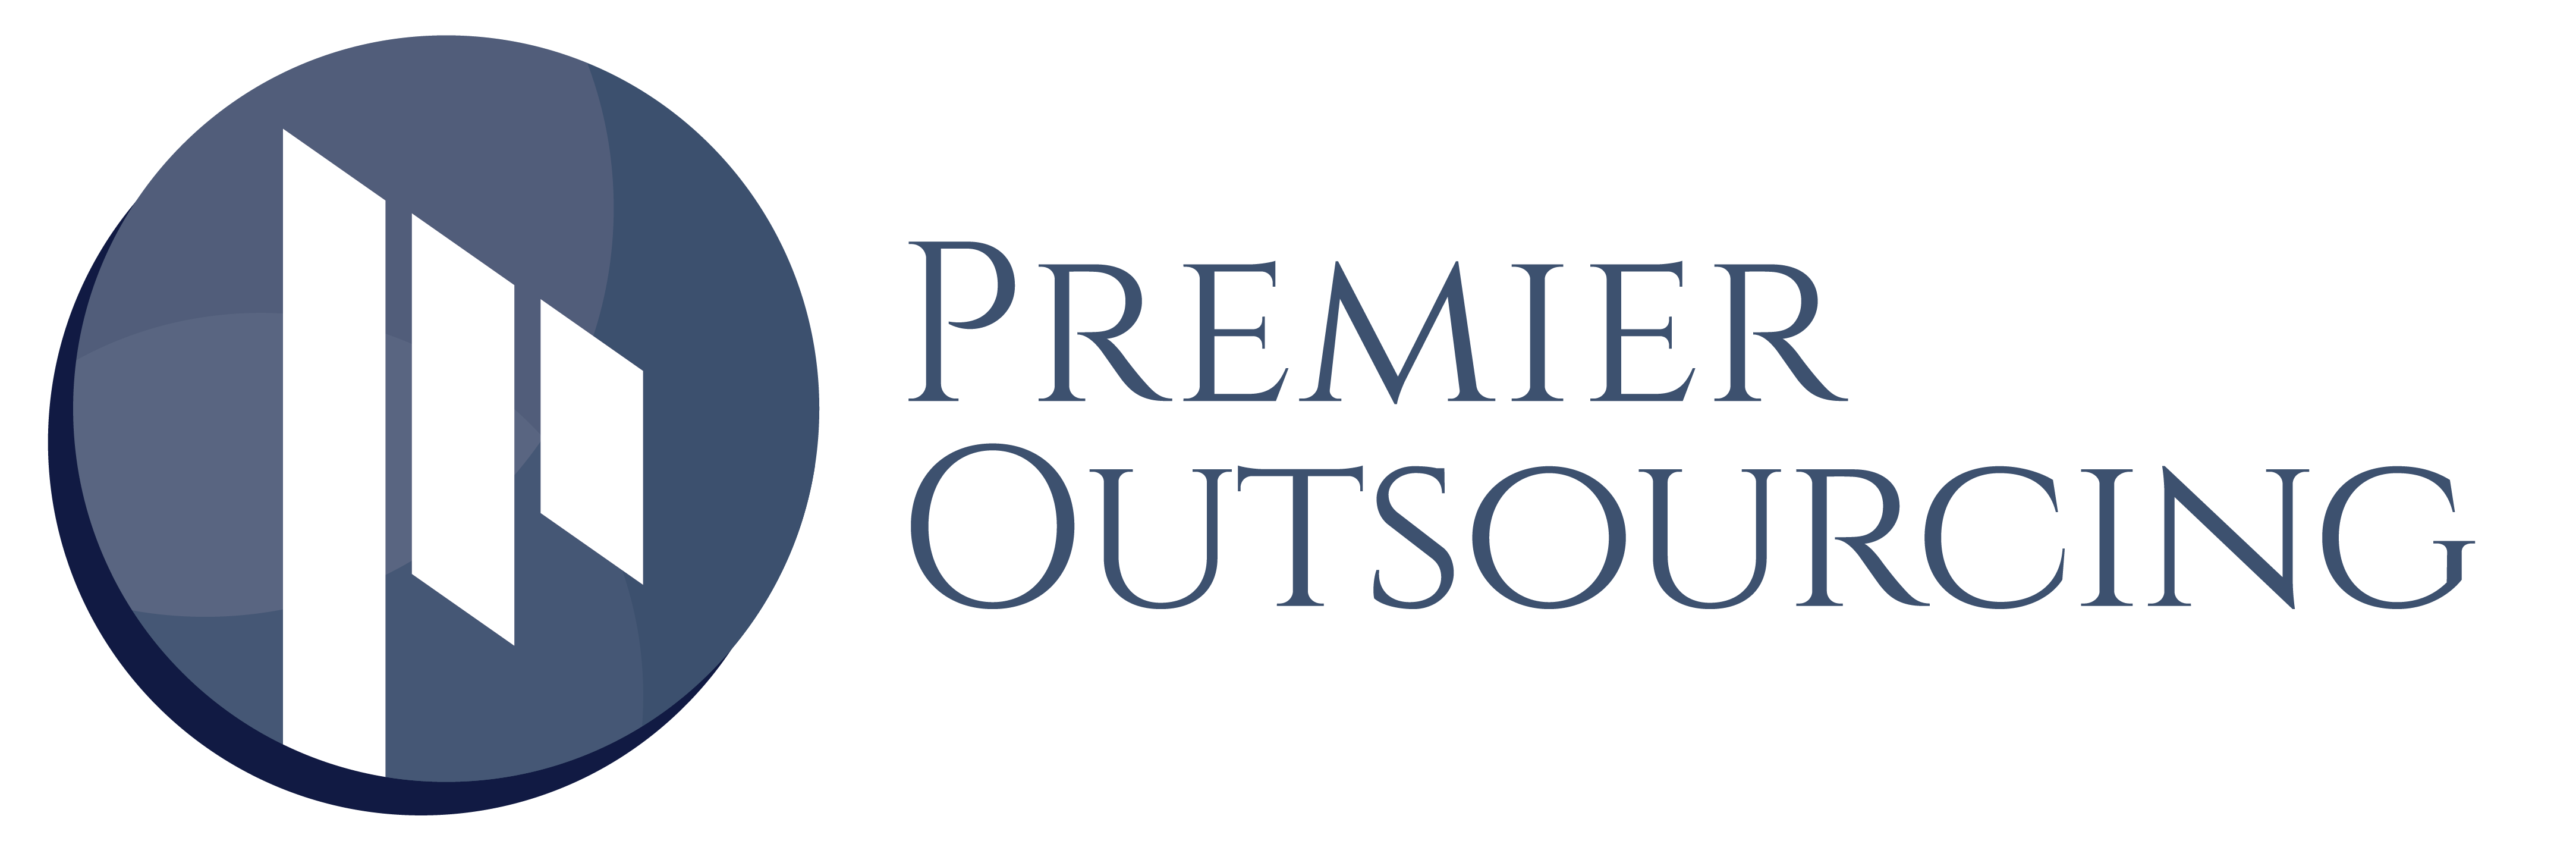 Premier Outsourcing